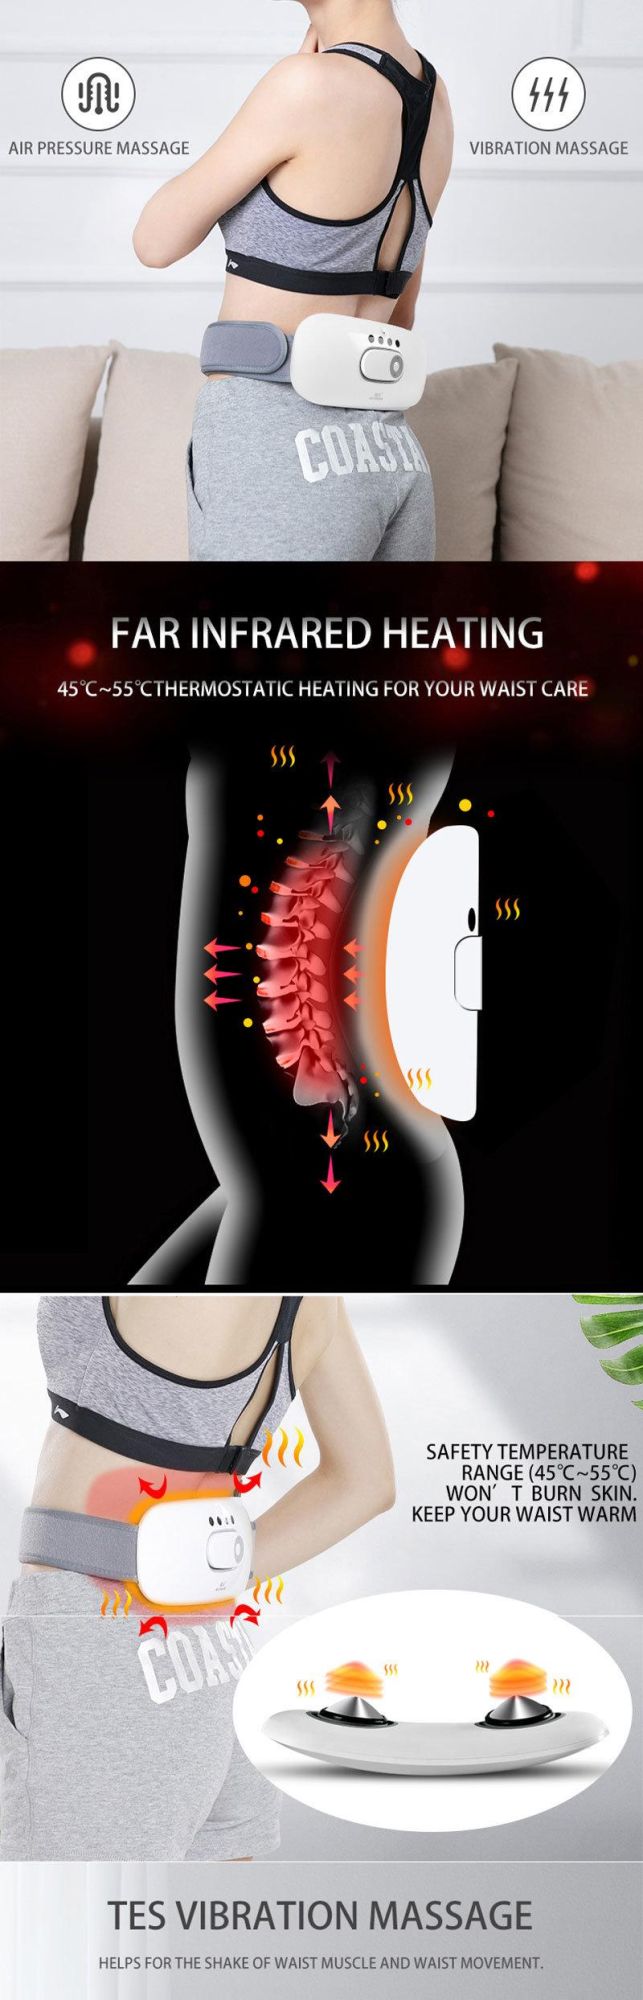 Hezheng Wireless Low Back Pain Massager with Heat, Air Compression, Vibration for Women Waist Therapy Use